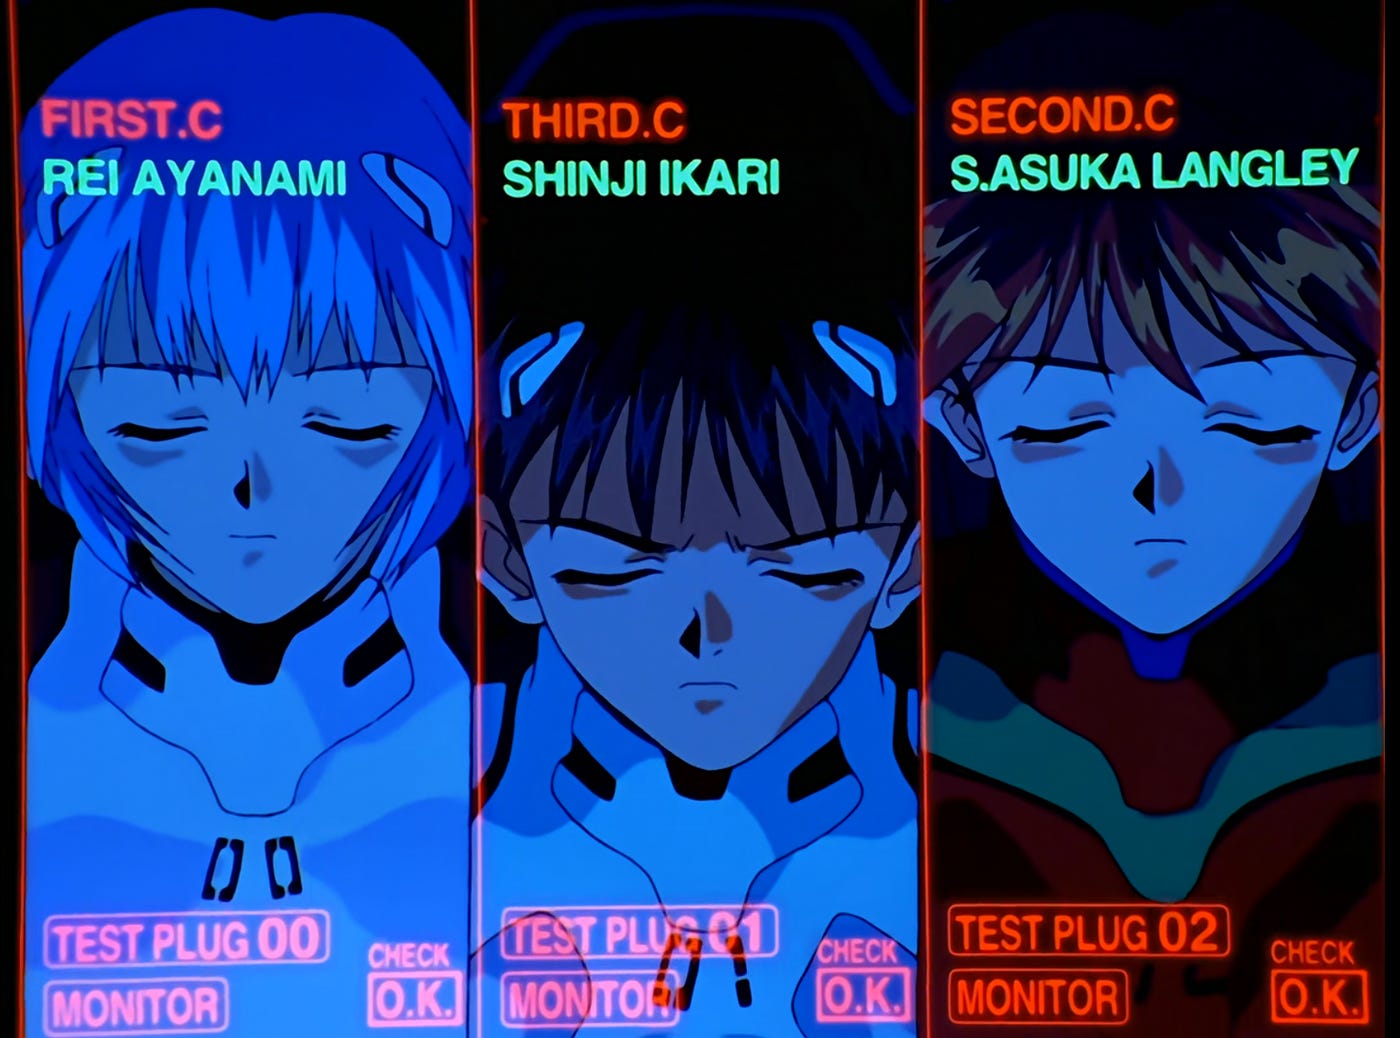 A monitor showing footage of the three pilots performing a connectivity test. The image is divided in three columns, each showing the face of one pilot. They are illuminated in blue lighting, their eyes are closed. Ayanami is on the left, Shinji is in the middle, and Asuka is on the right.